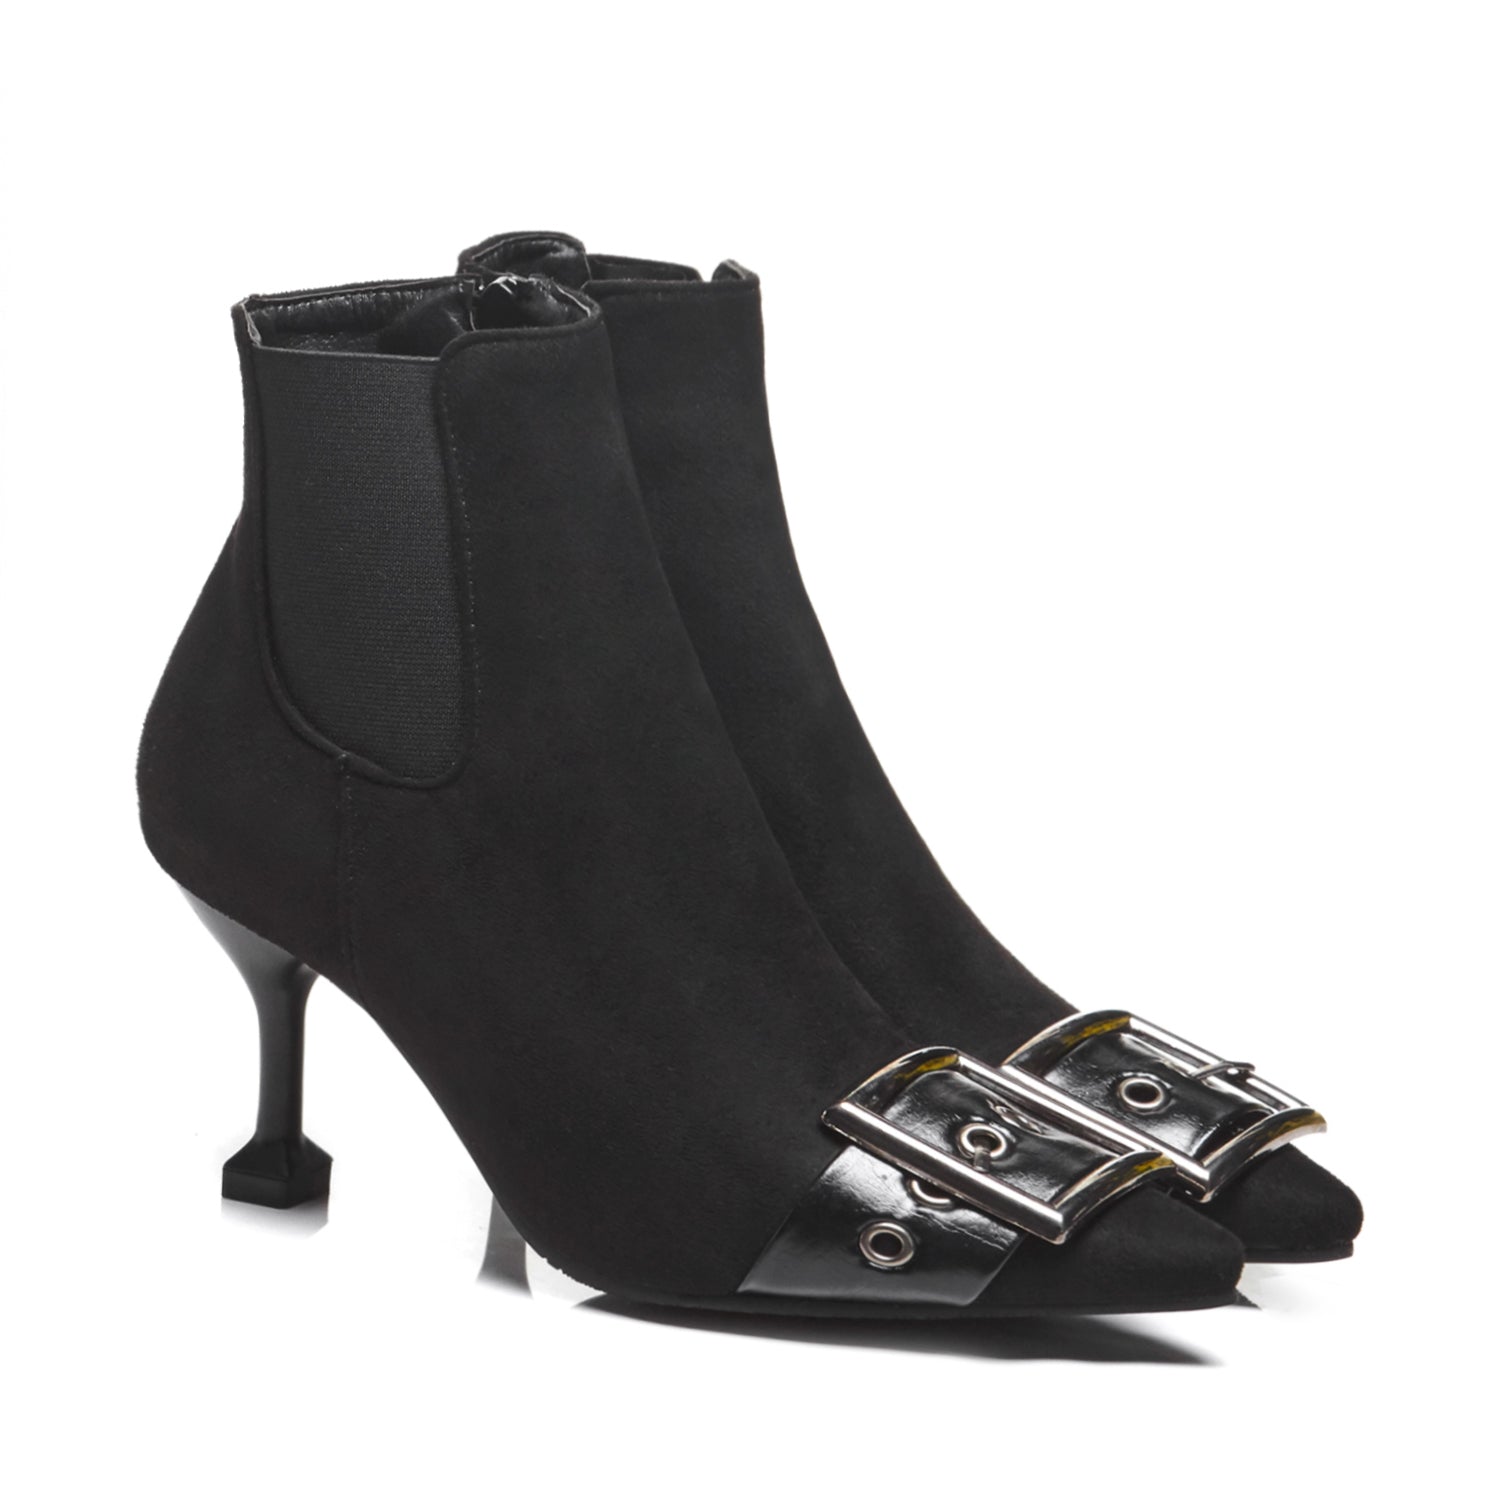 Bigsizeheels Sexy ankle boots with pointed belt buckles - Black freeshipping - bigsizeheel®-size5-size15 -All Plus Sizes Available!